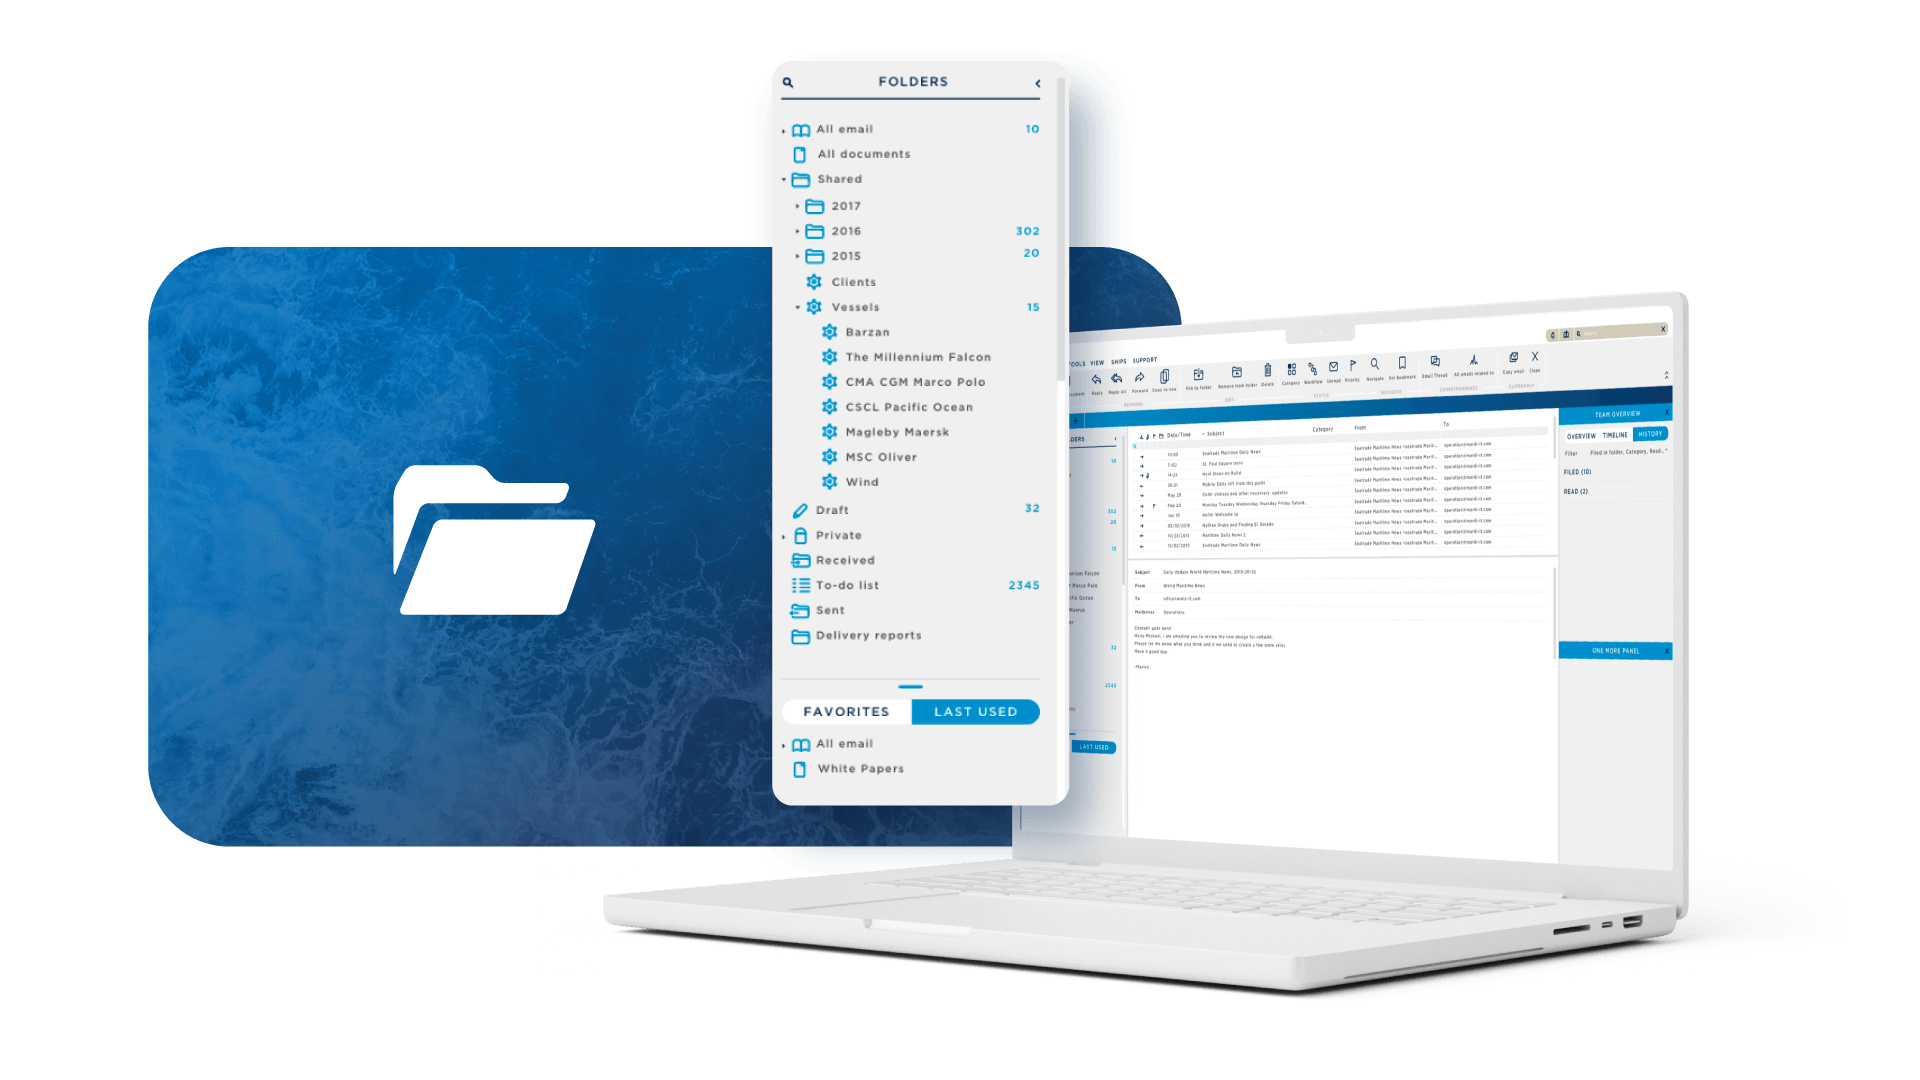 reMARK's collaborative email solution includes an advanced folder system so users can easily manage high volumes of emails.